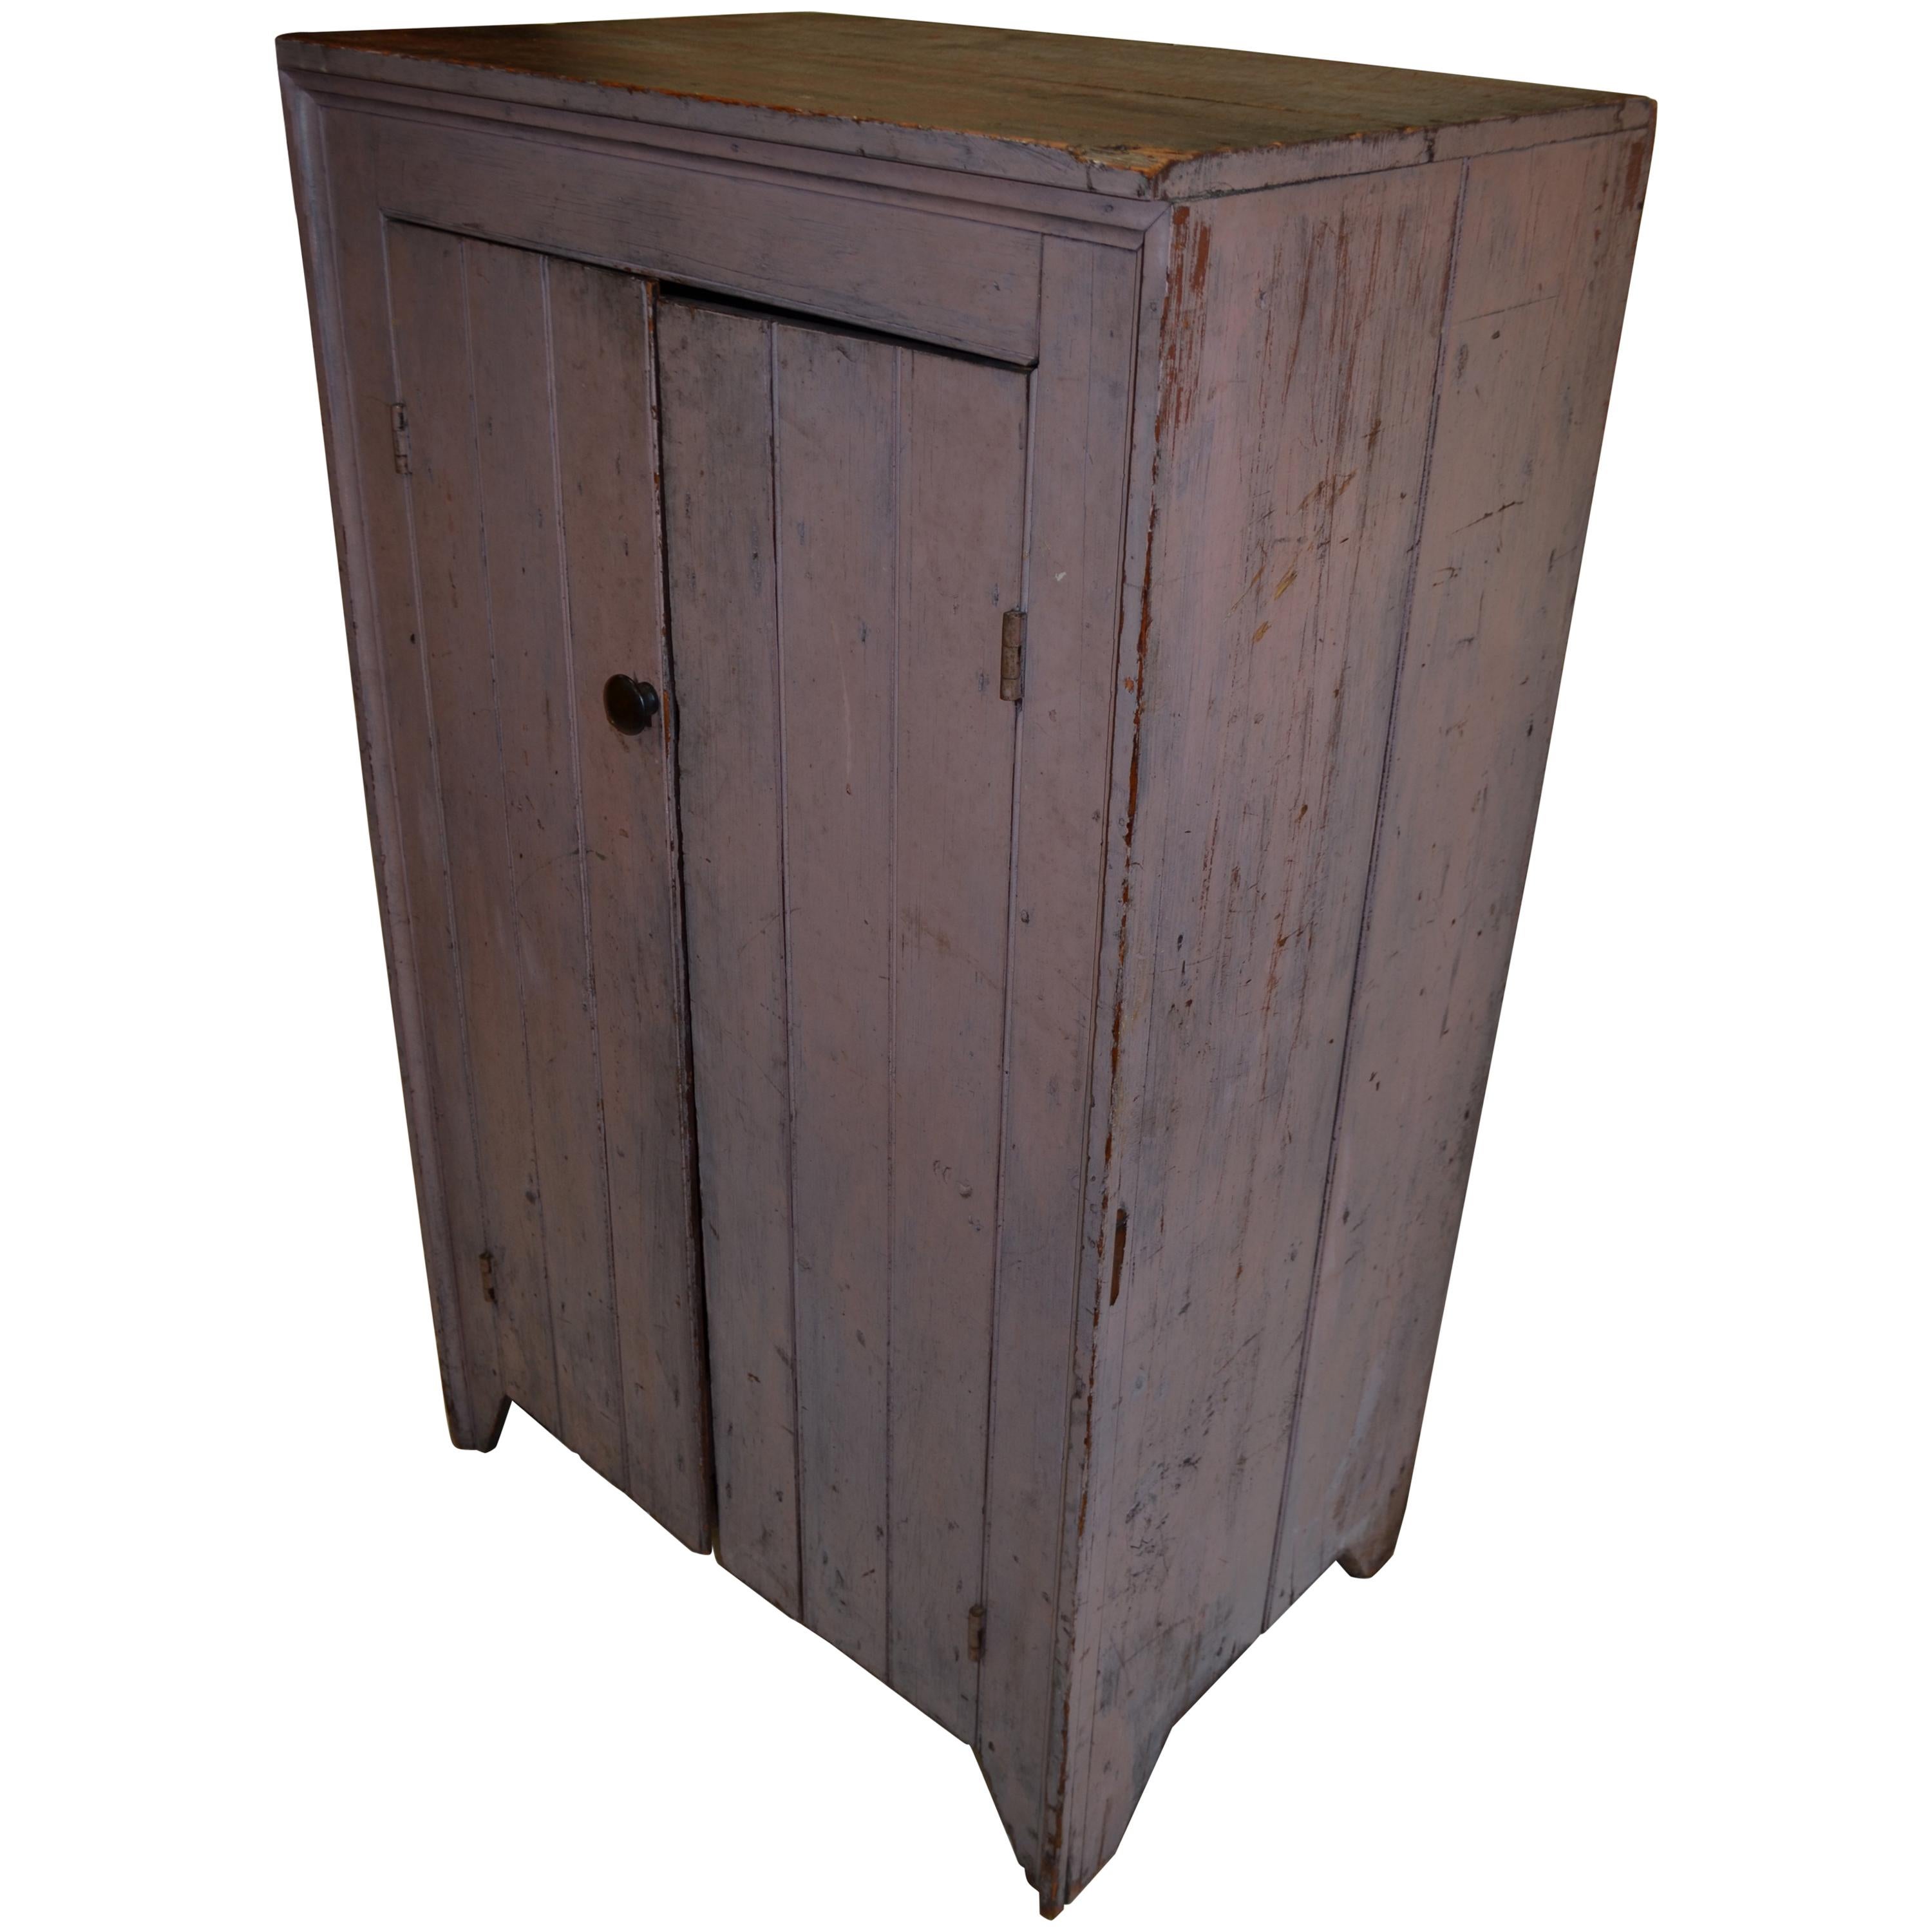 Early 1800s Cupboard for Parlor, Kitchen, Pantry with Lockbox Inside